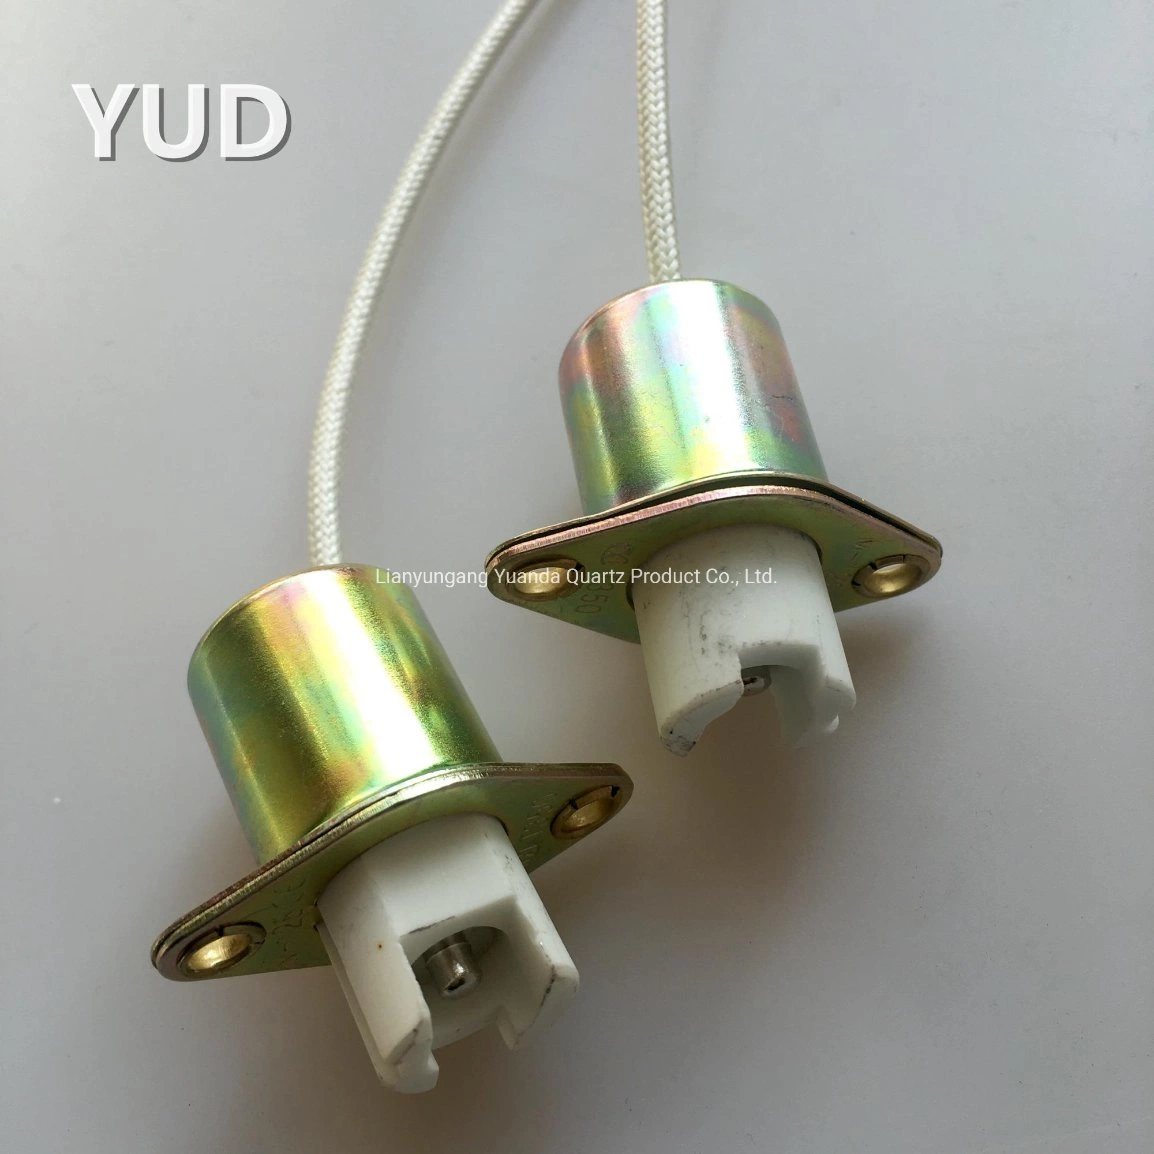 R7s Lamp Holder for Halogen Lamp R7s Lamp Holder with The Wire